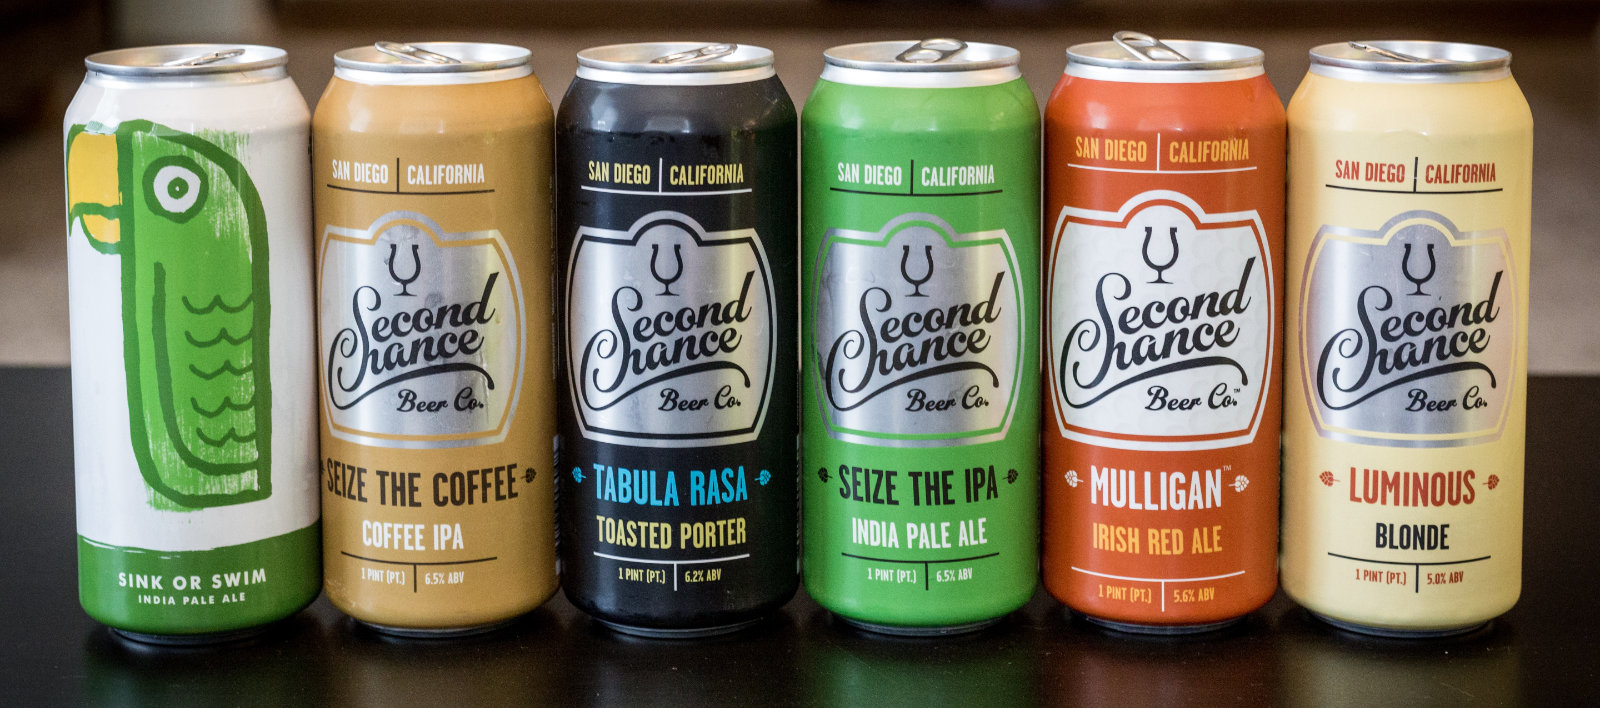 Beers From Green Cheek and Second Chance